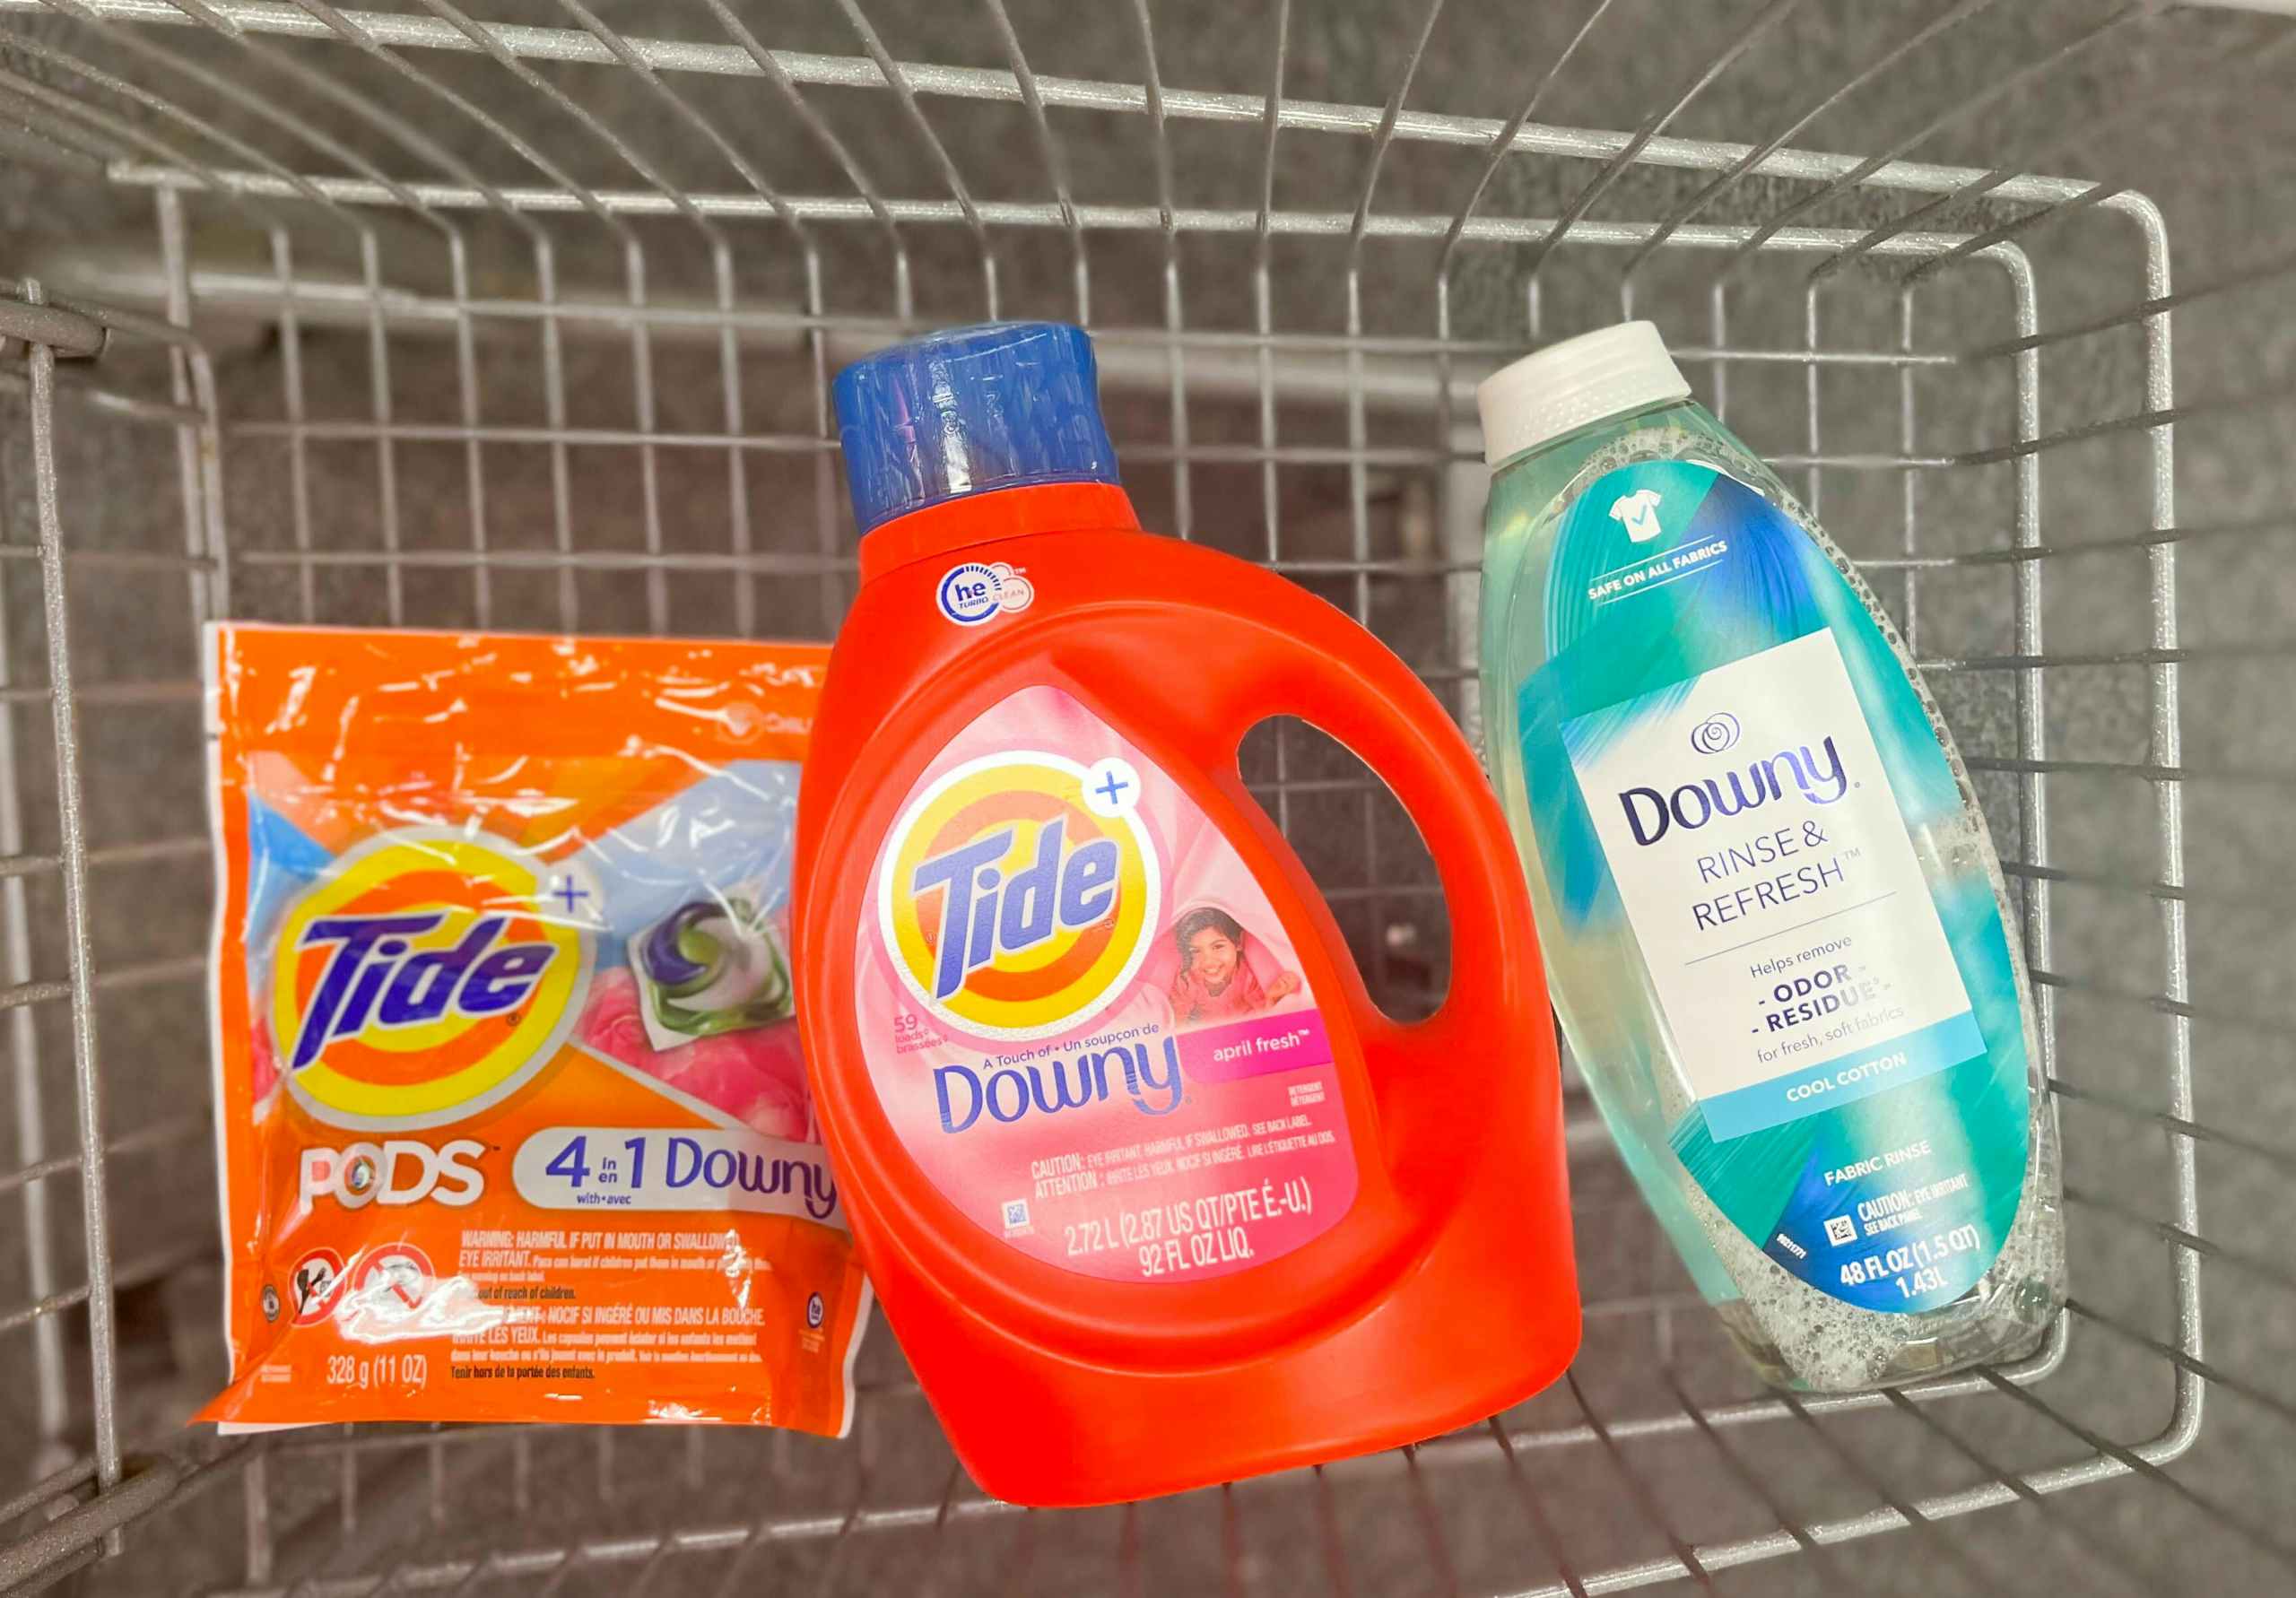 one bottle of Tide liquid detergent, Downy Rinse and Refresh, and one pack of Tide pods inside shopping cart